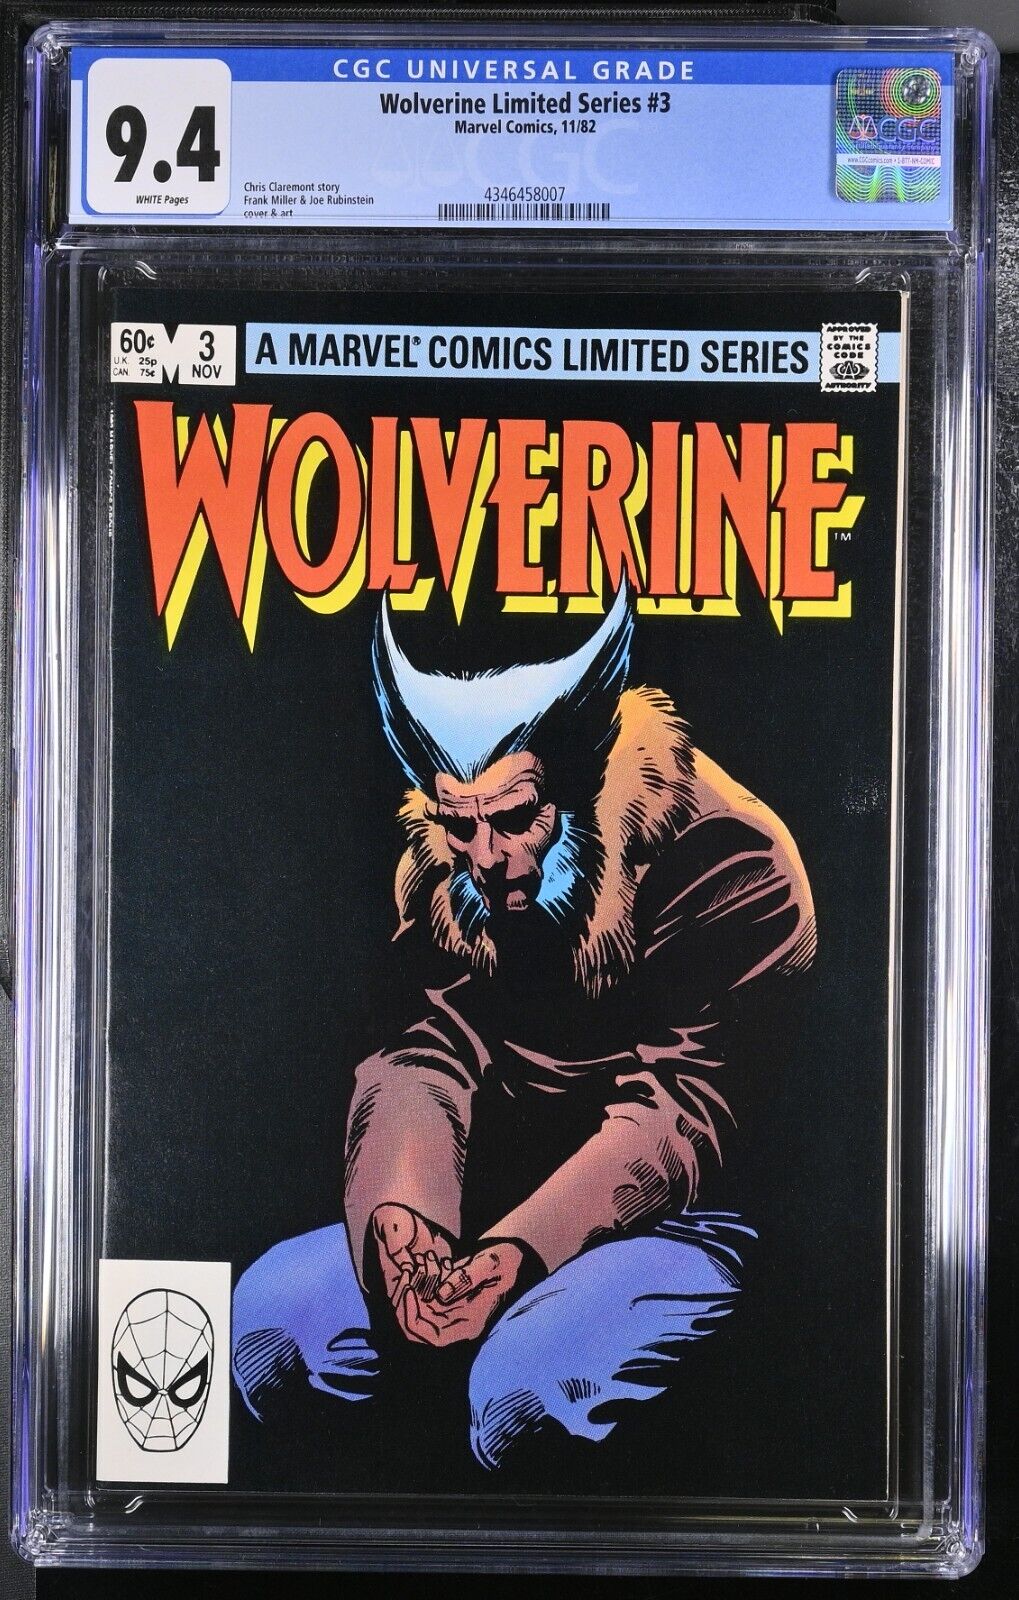 WOLVERINE LIMITED SERIES #3 CGC 9.4 WP FRANK MILLER COVER/ART 4346458007